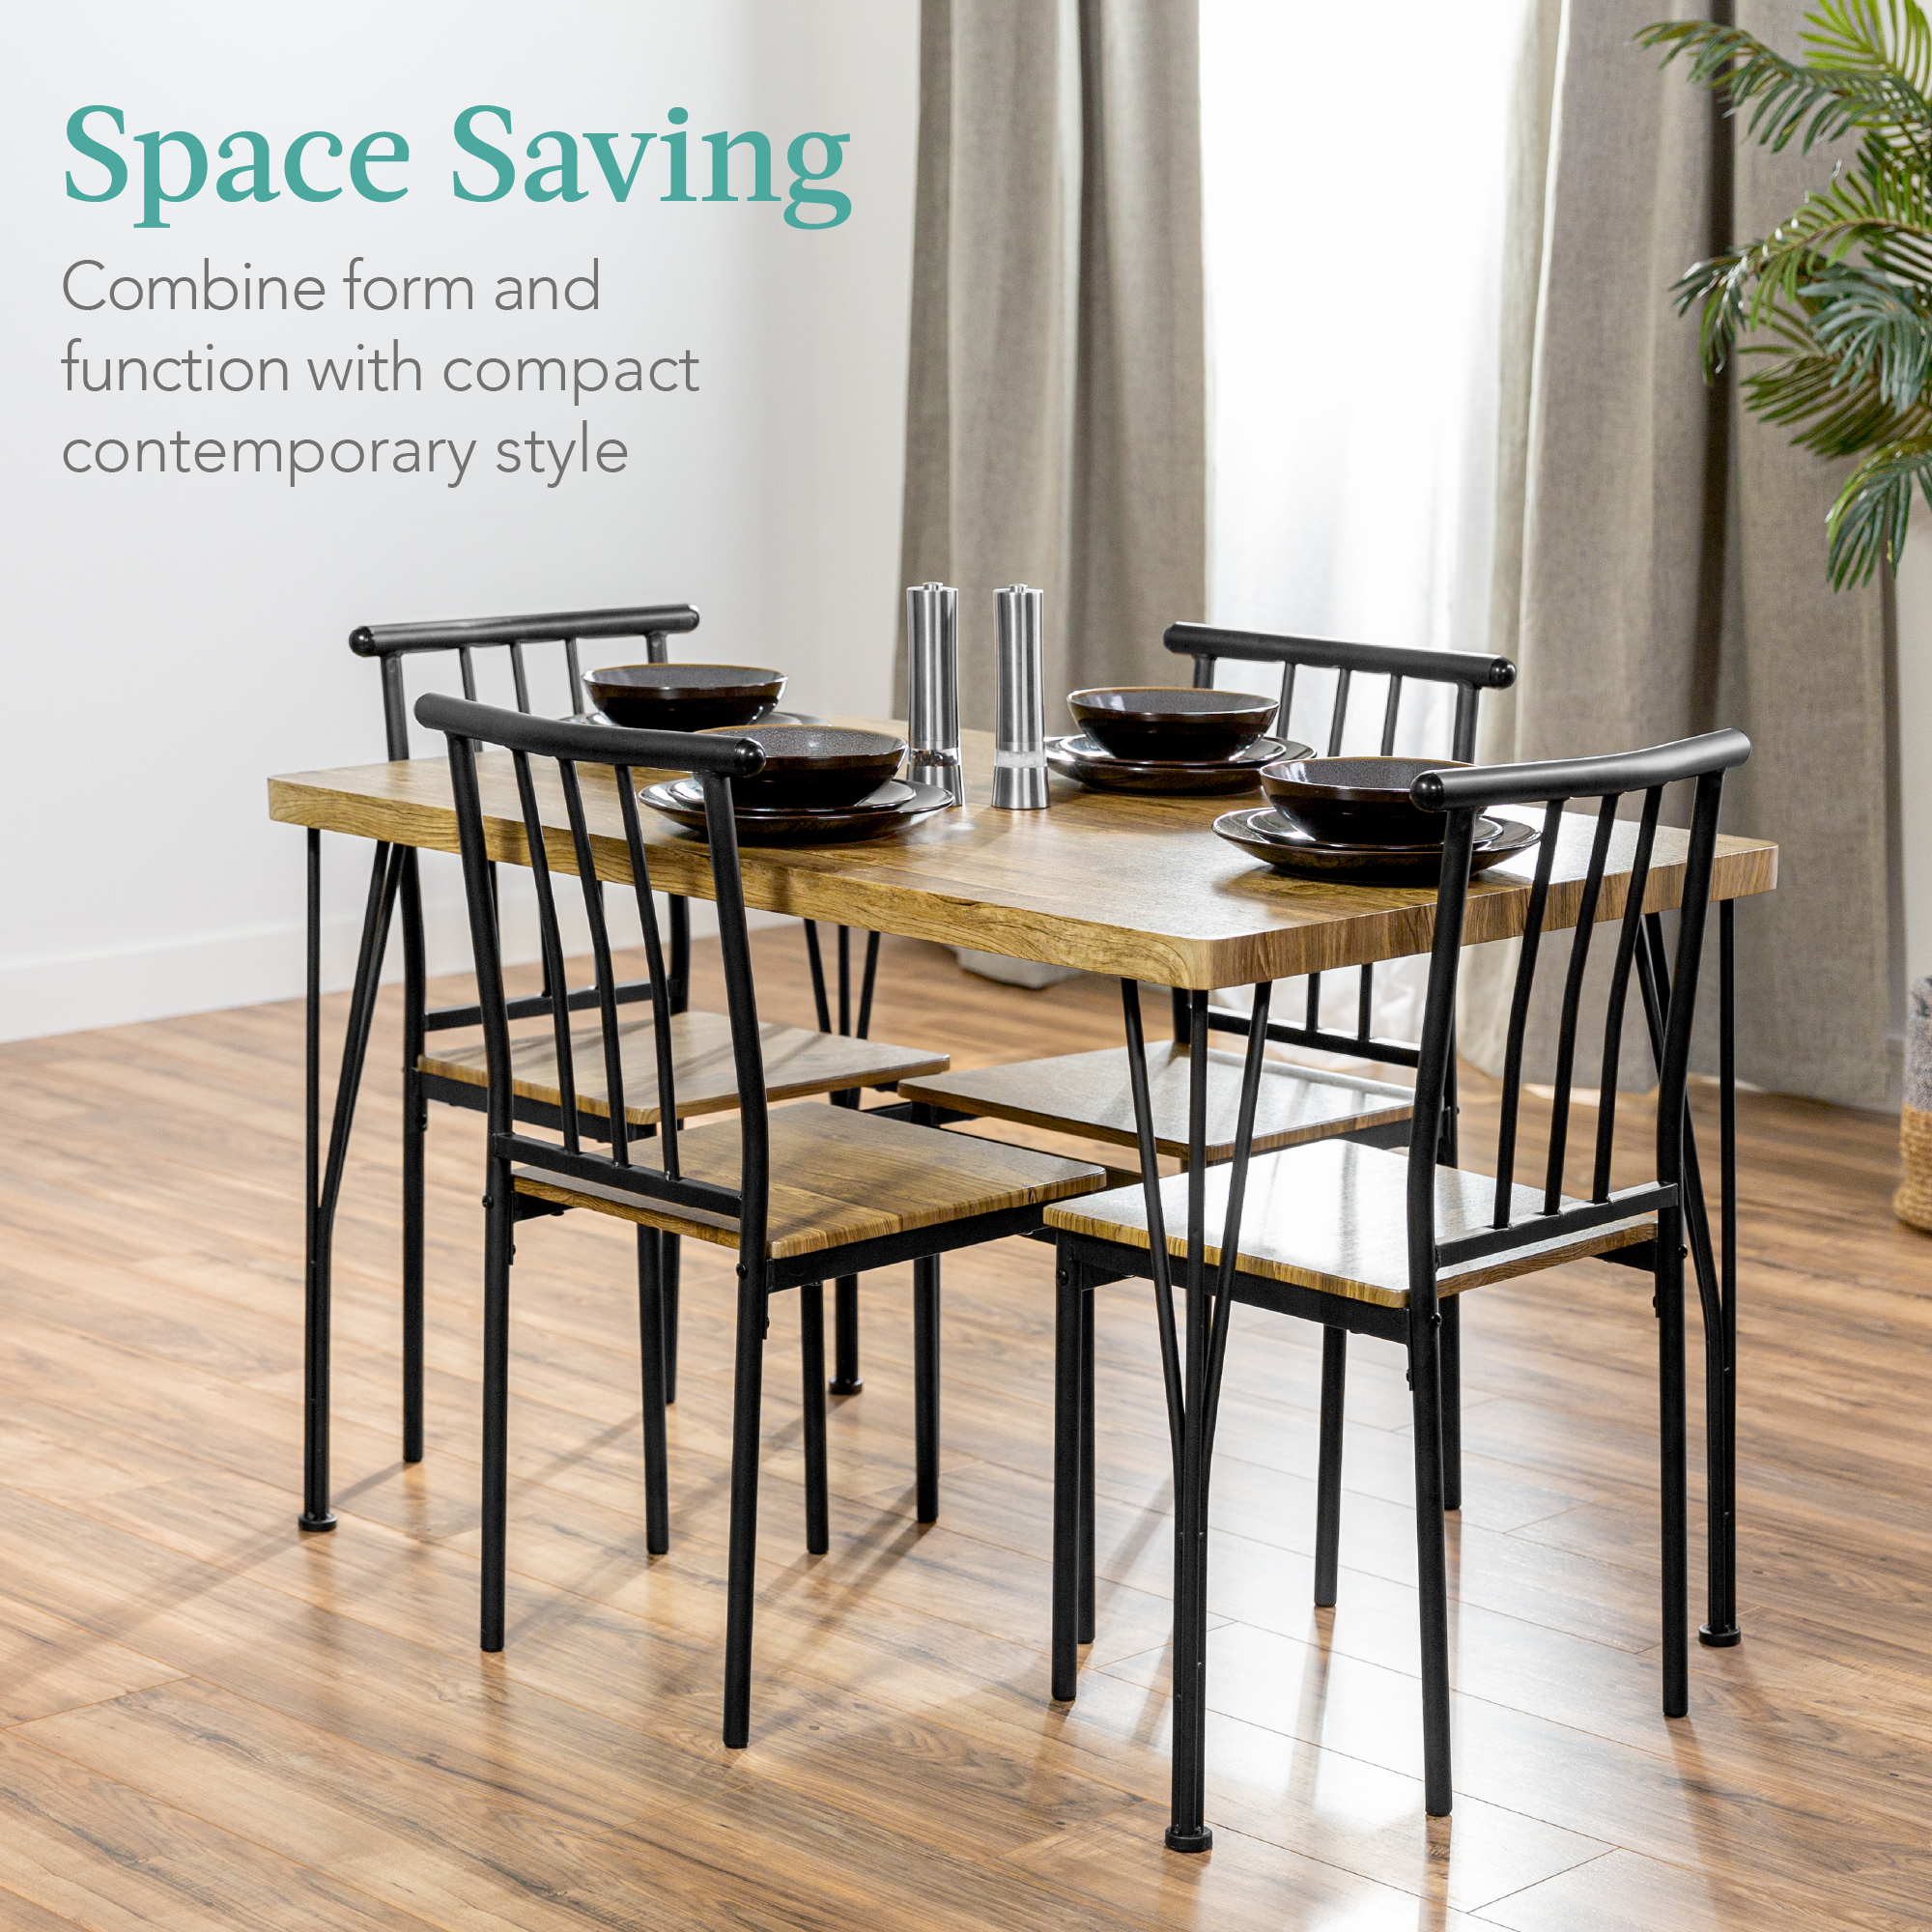 Best Choice Products 5-Piece Indoor Modern Metal Wood Rectangular Dining Table Furniture Set w/ 4 Chairs - Brown - image 2 of 7